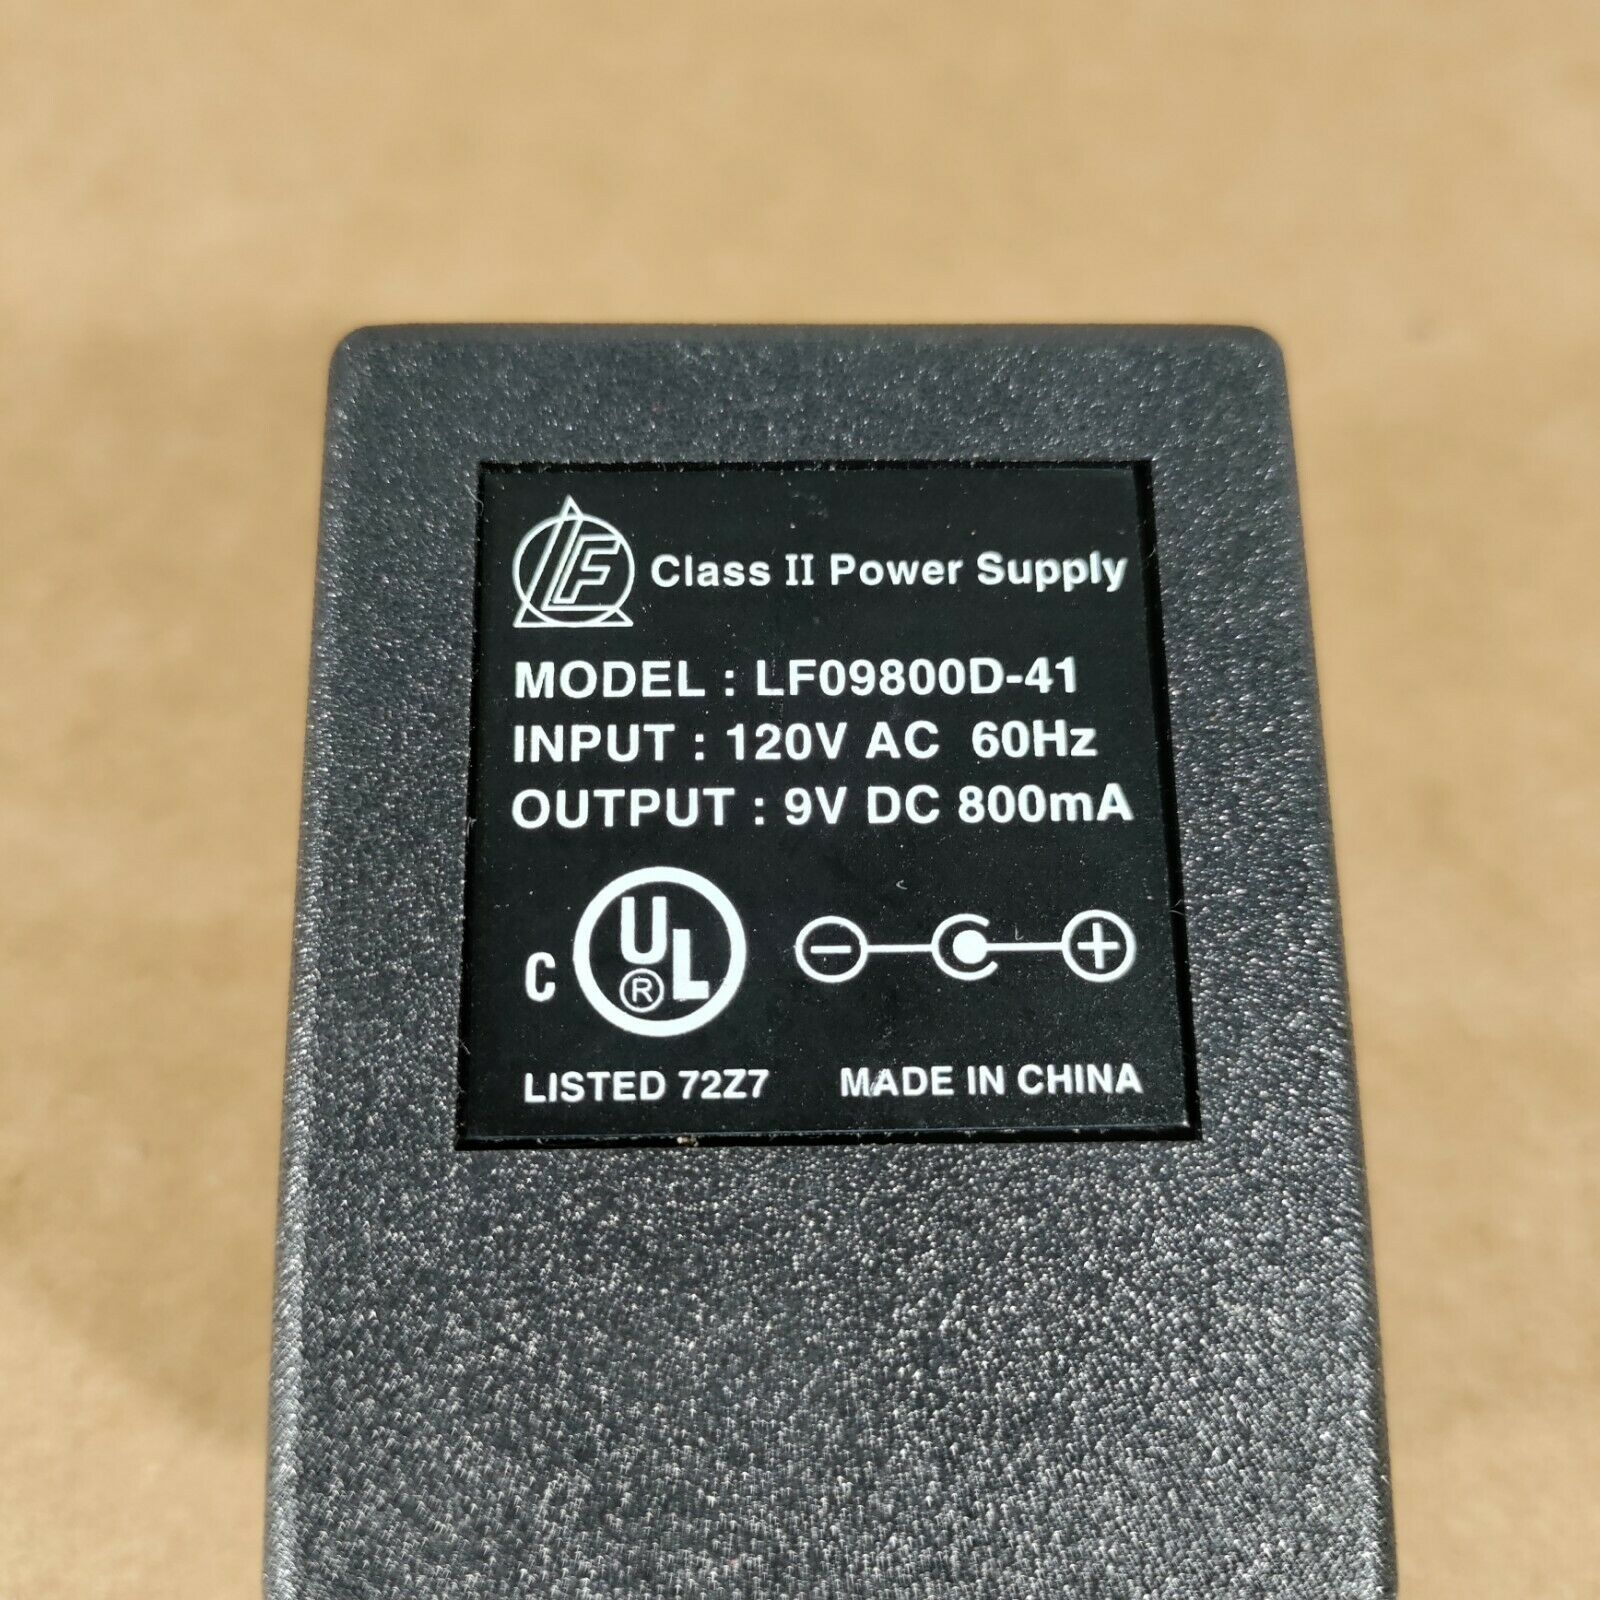 LF Class 2 AC/DC Power Supply 9v 800mA LF09800D-41 Features: new Output Voltage: 9 V Brand: Unb - Click Image to Close